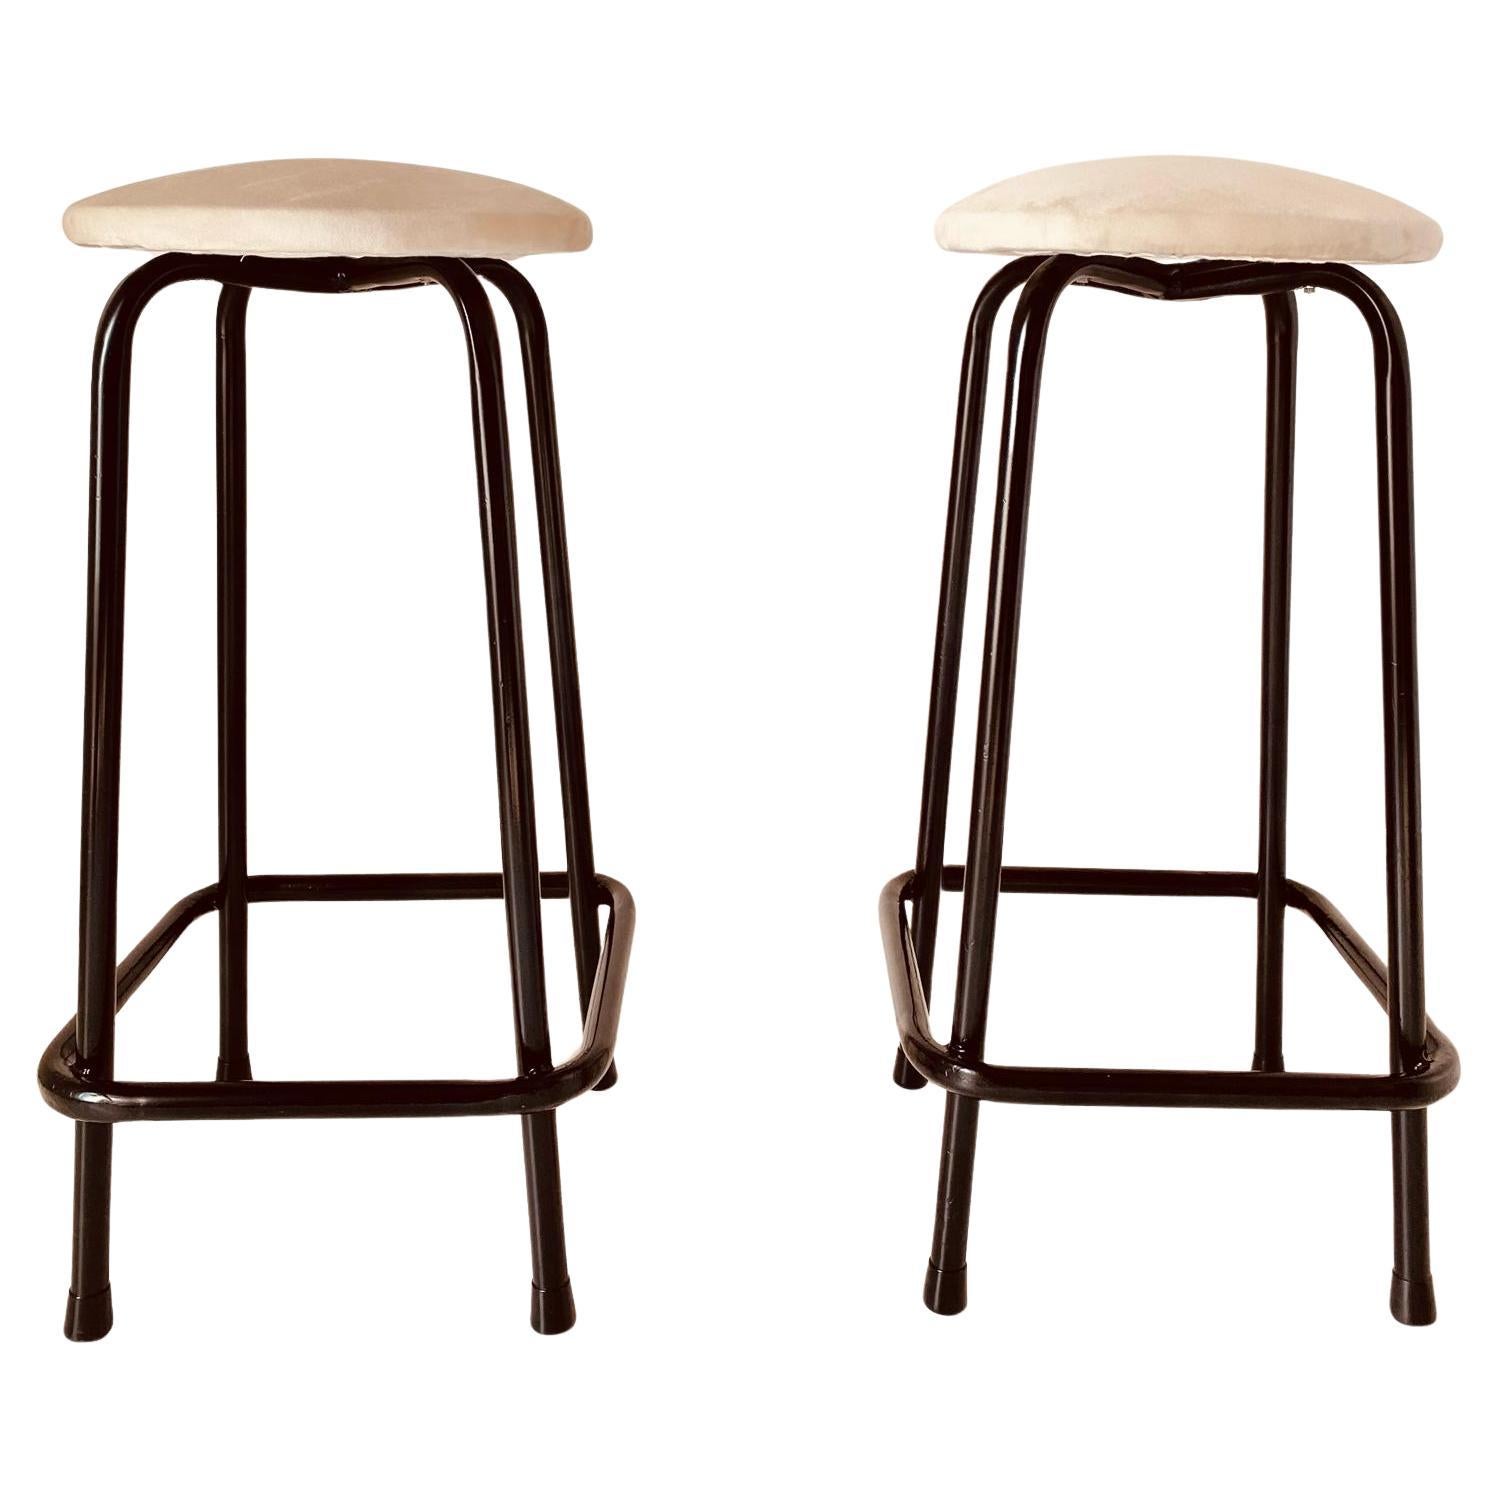 A pair of beautiful vintage velvet stools. Seat in beige velvet with four legs iron black painted legs. Manufactured in Italy in the 1960's. 
Original fabric has been changed with waterproof velvet. Stool structure has been repainted. In excellent